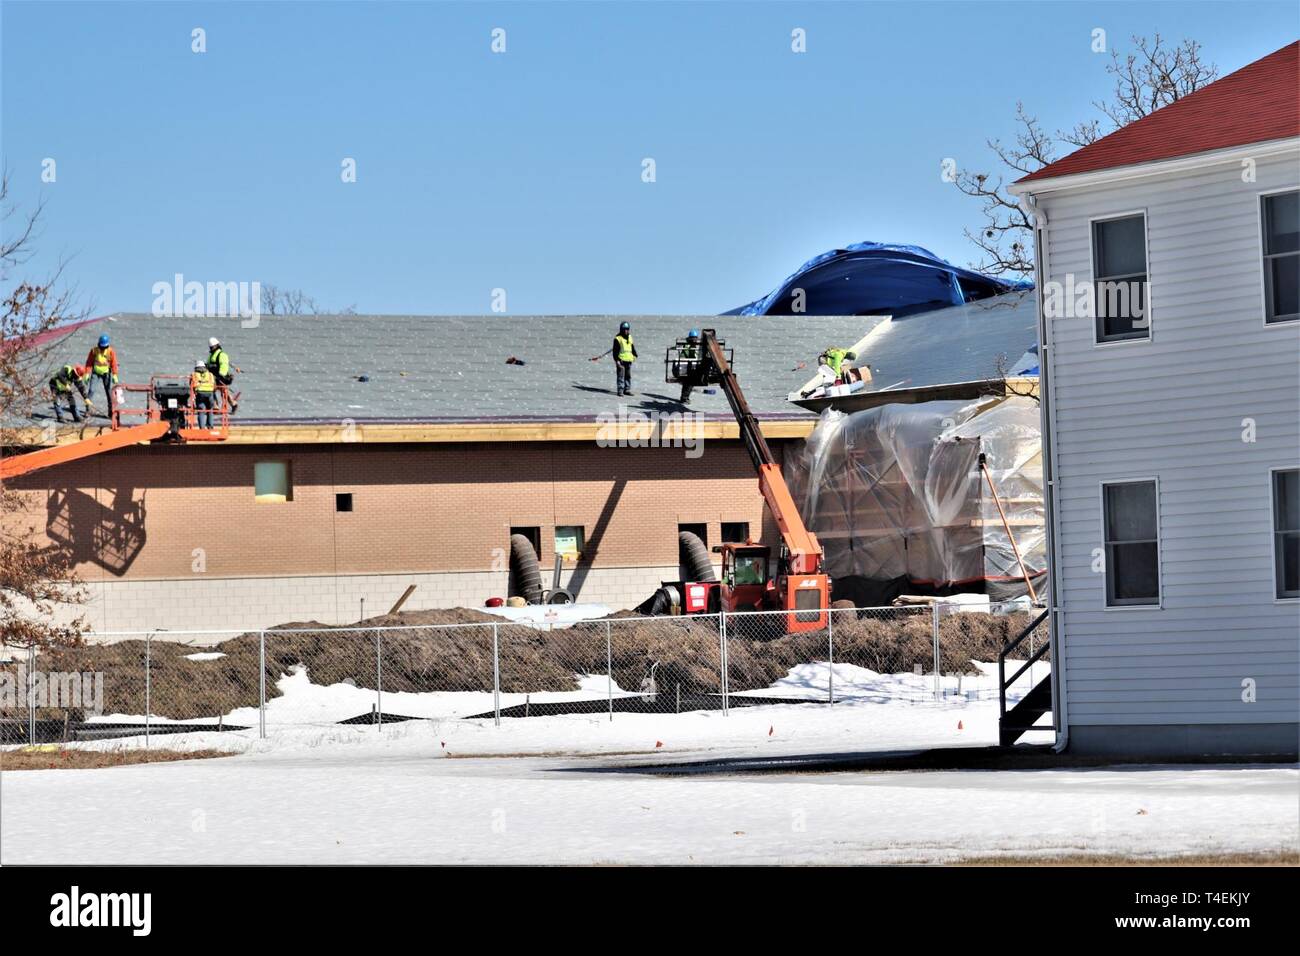 Contractors work on a new 1,428-person annual training/mobilization dining facility March 19, 2019, in the 2400 block at Fort McCoy, Wis. The project, coordinated by the U.S. Army Corps of Engineers, is being constructed by contractor L.S. Black Constructors of St. Paul, Minn., and is supposed to be completed in late 2019. Stock Photo